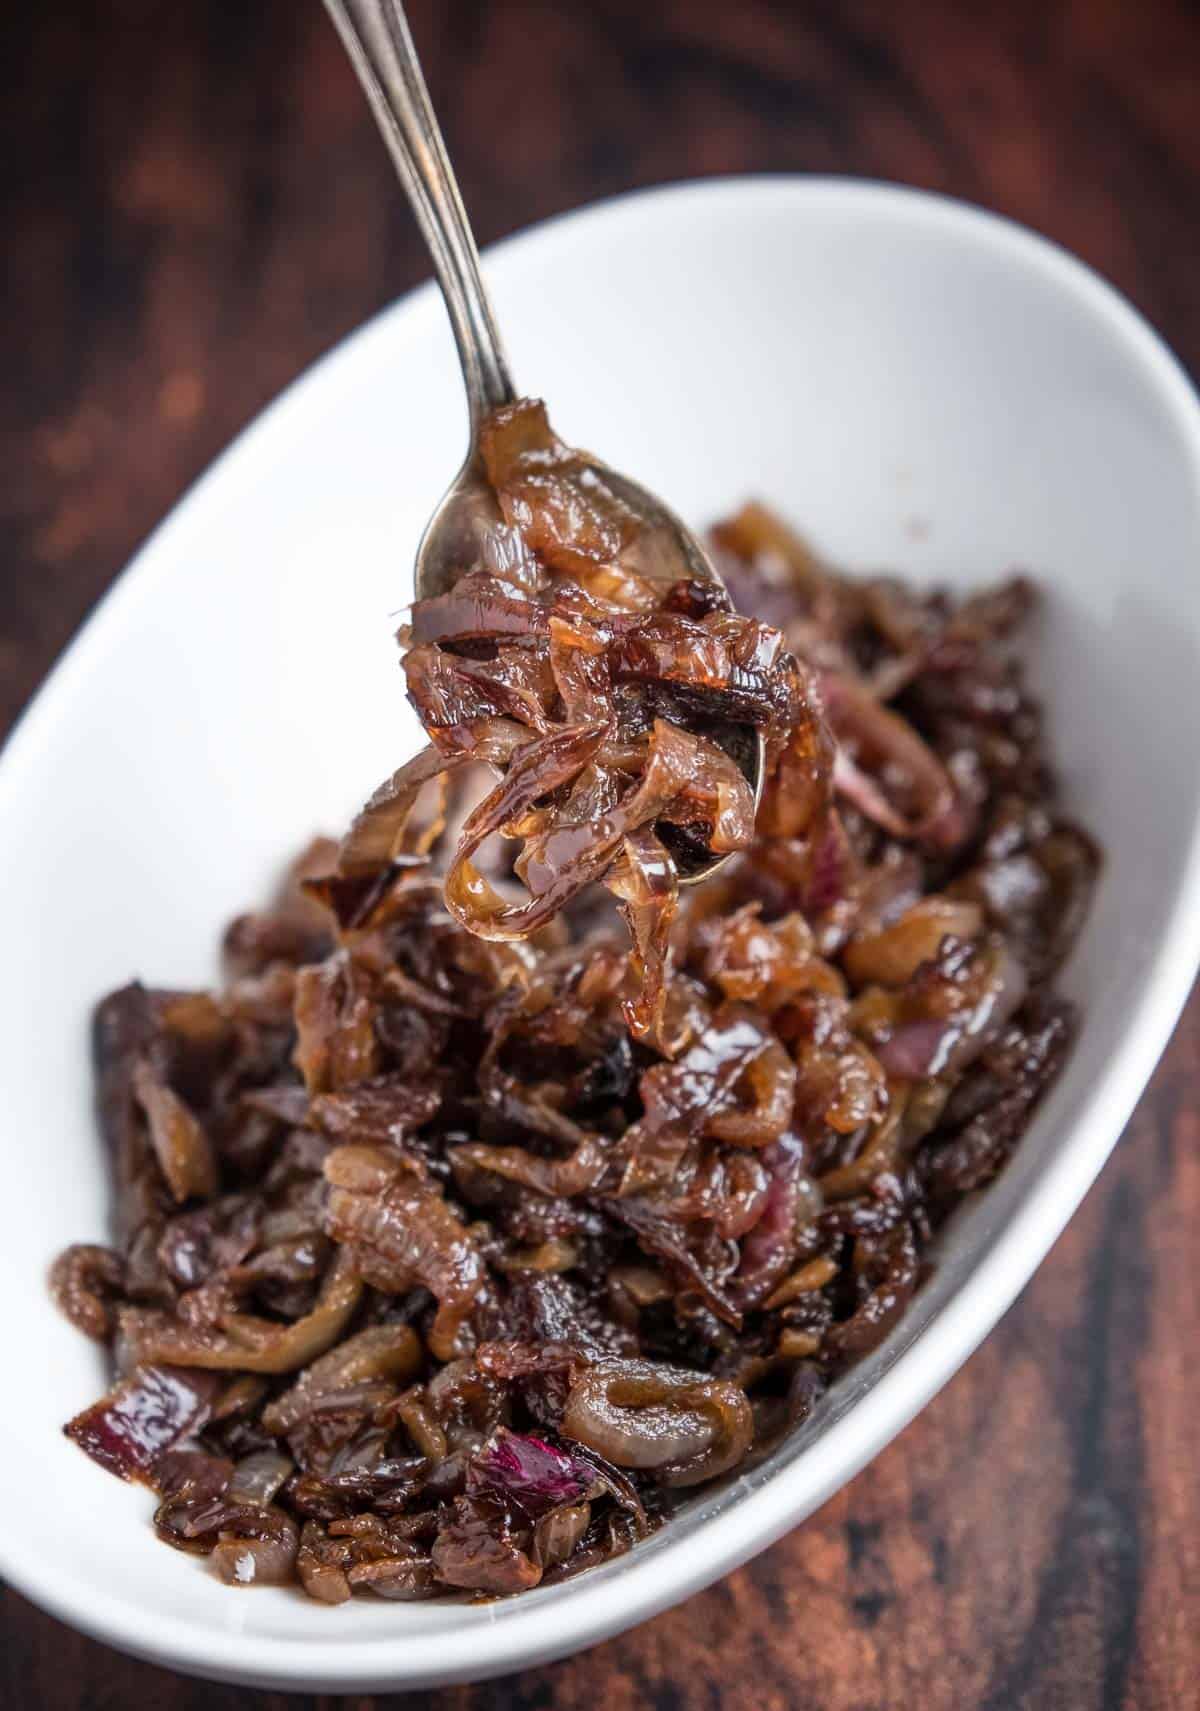 Caramelized onions on a spoon over a serving dish